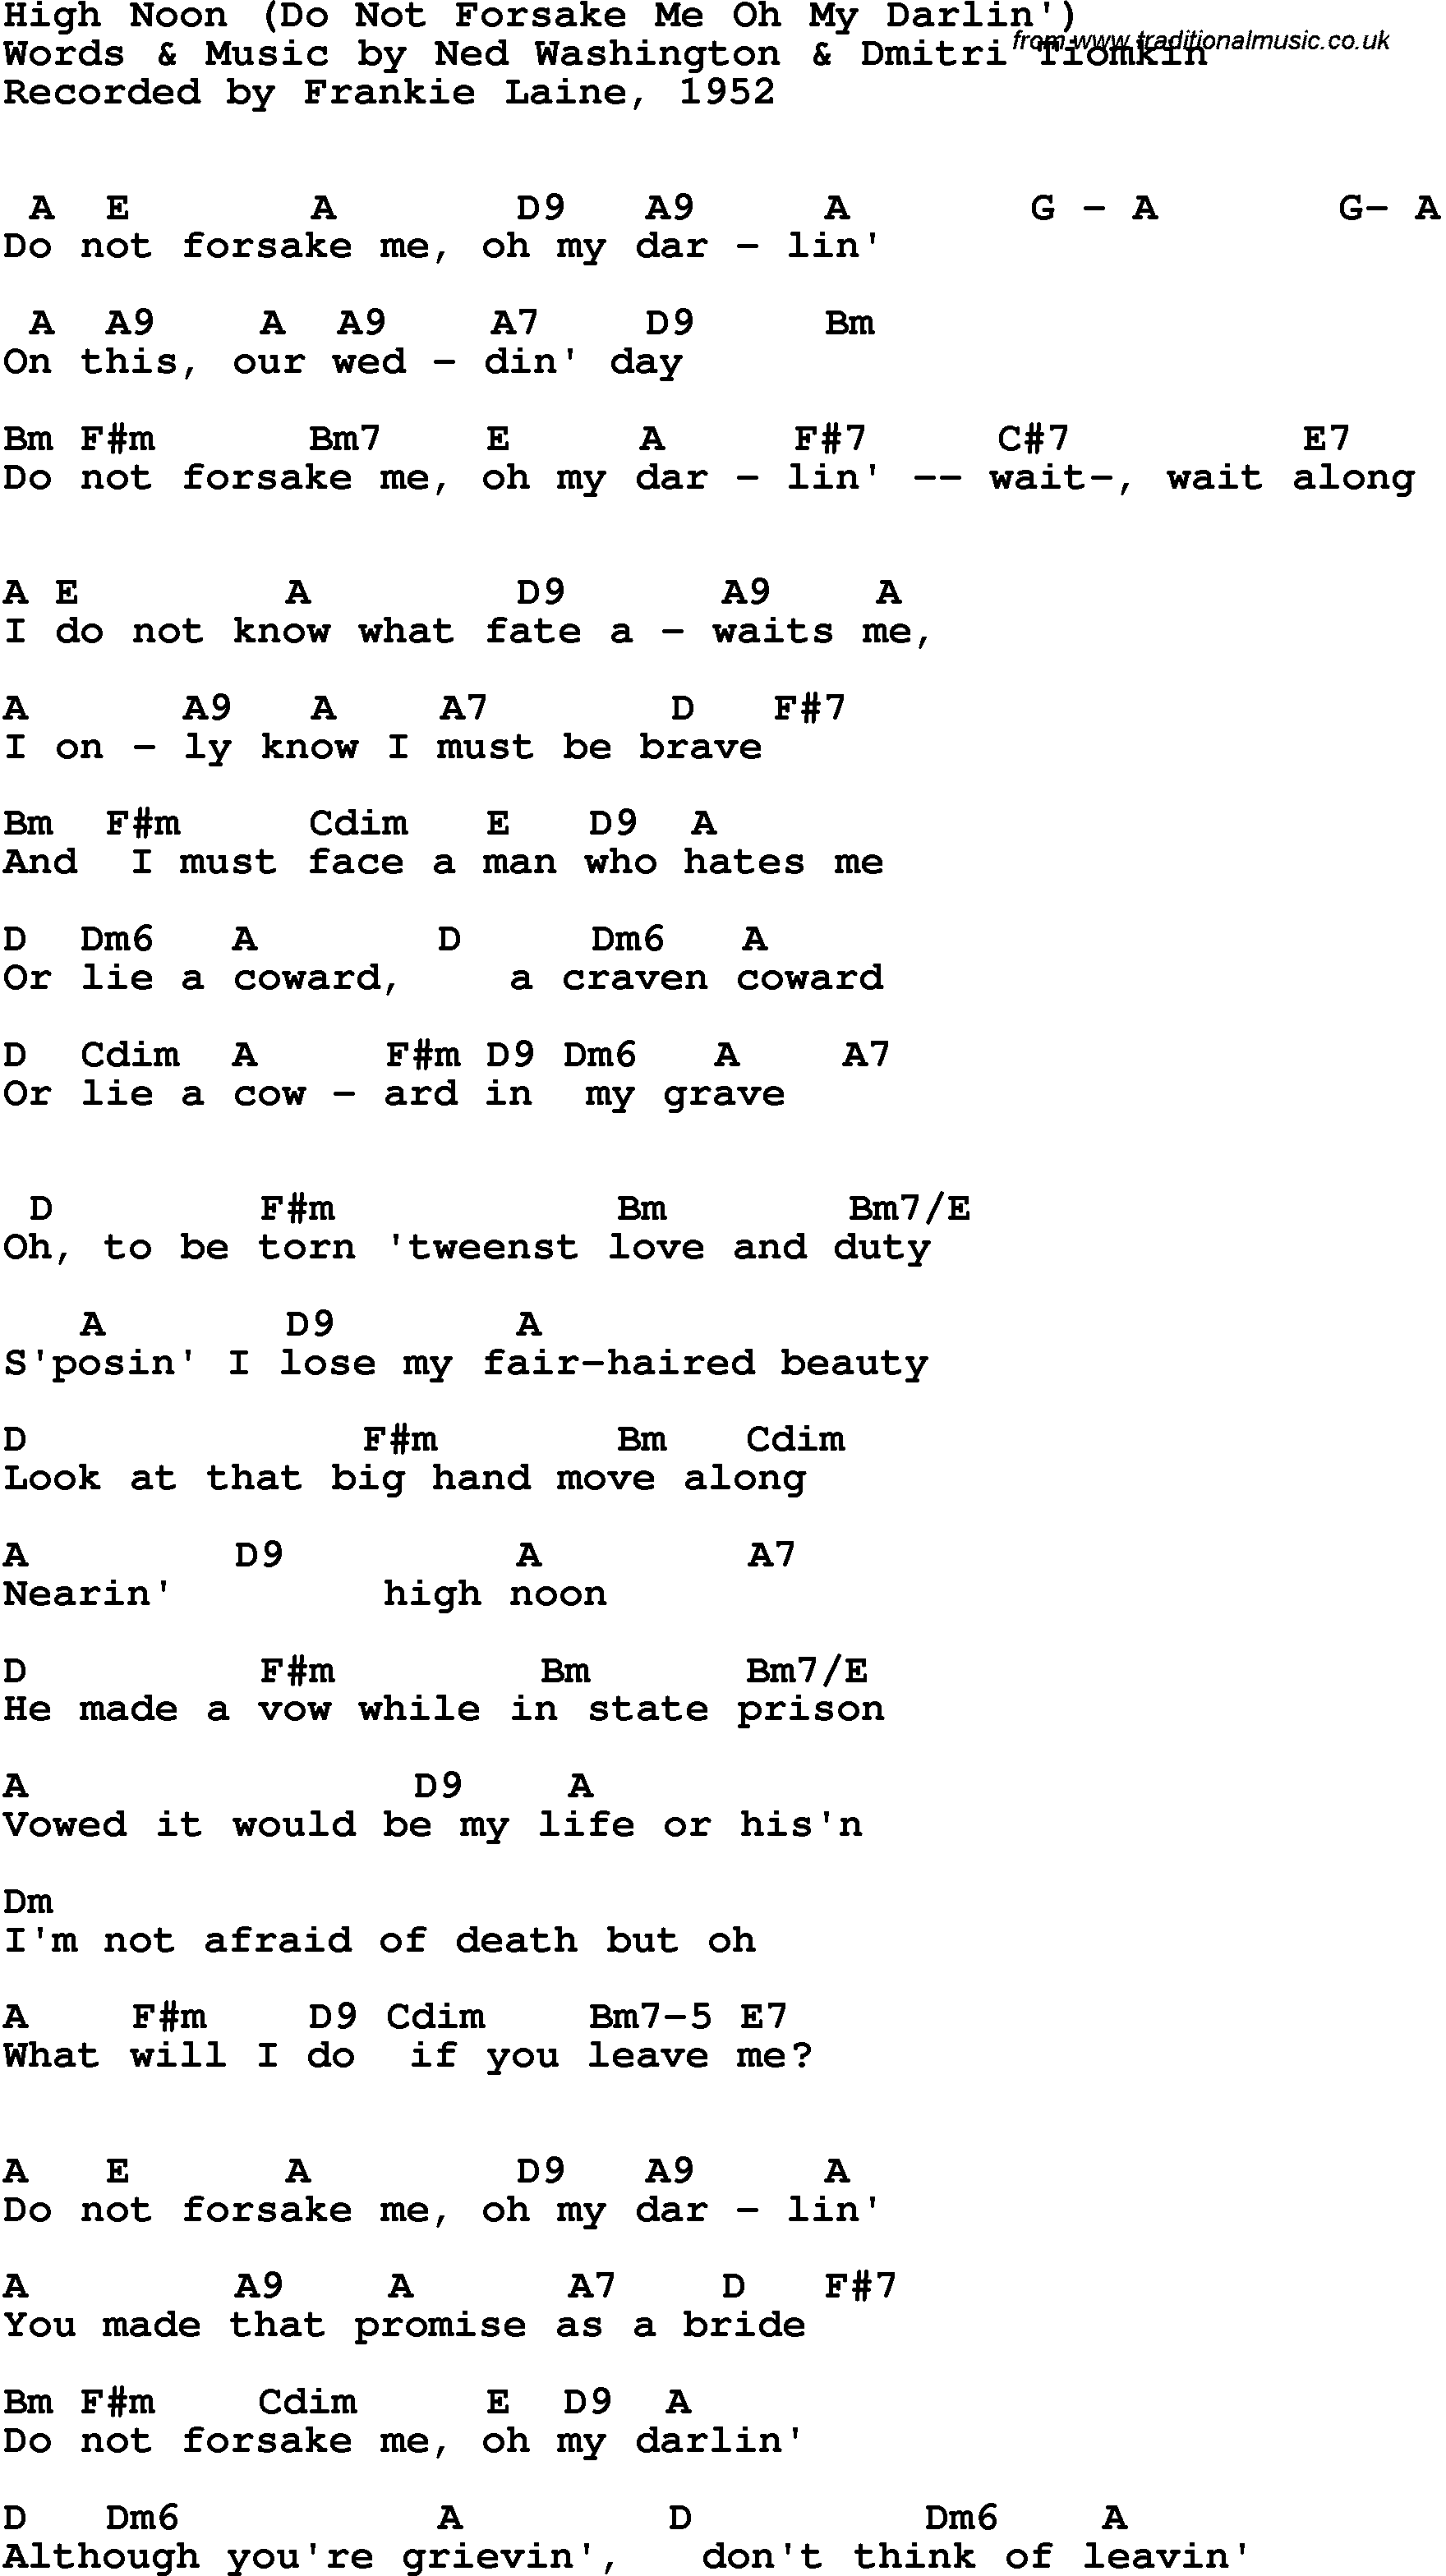 Song Lyrics with guitar chords for High Noon - Frankie Laine, 1952